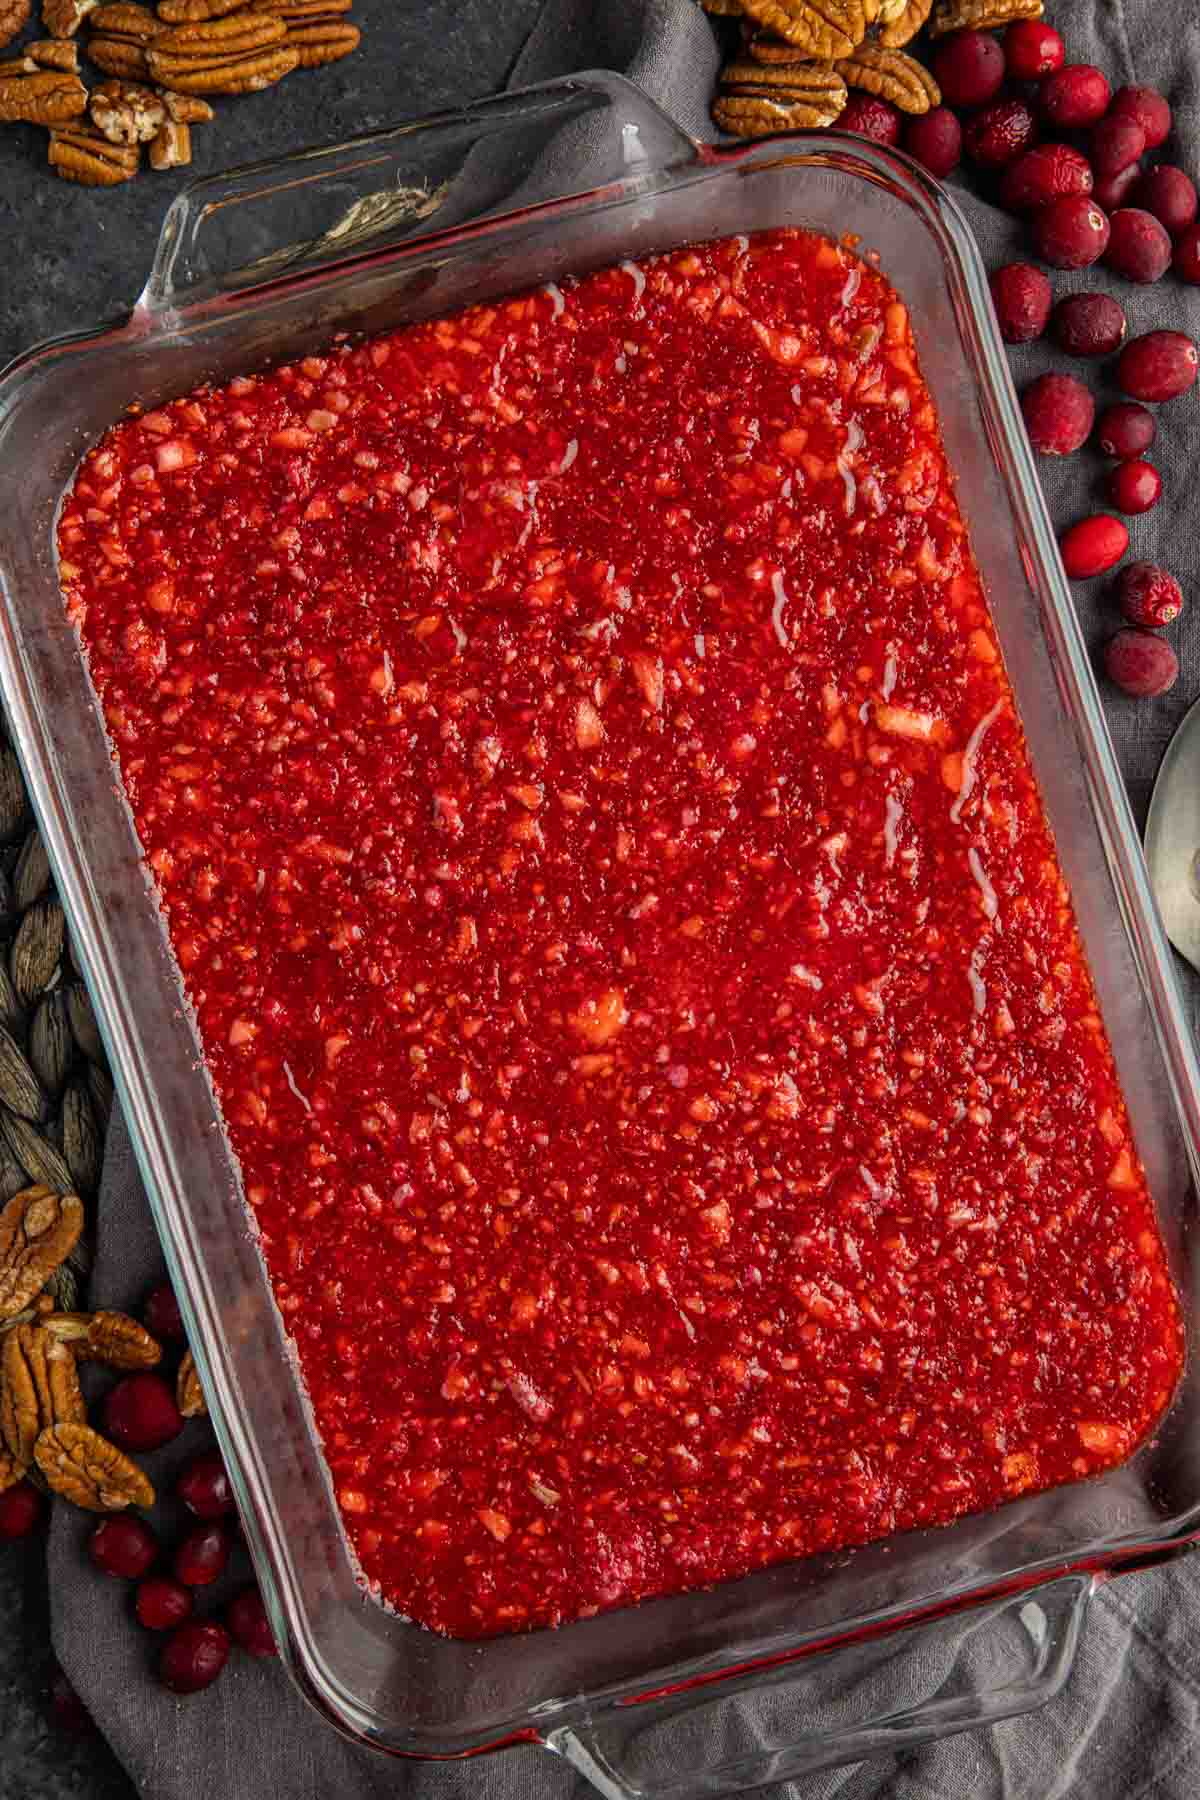 Cranberry Jello Salad in a pyrex dish